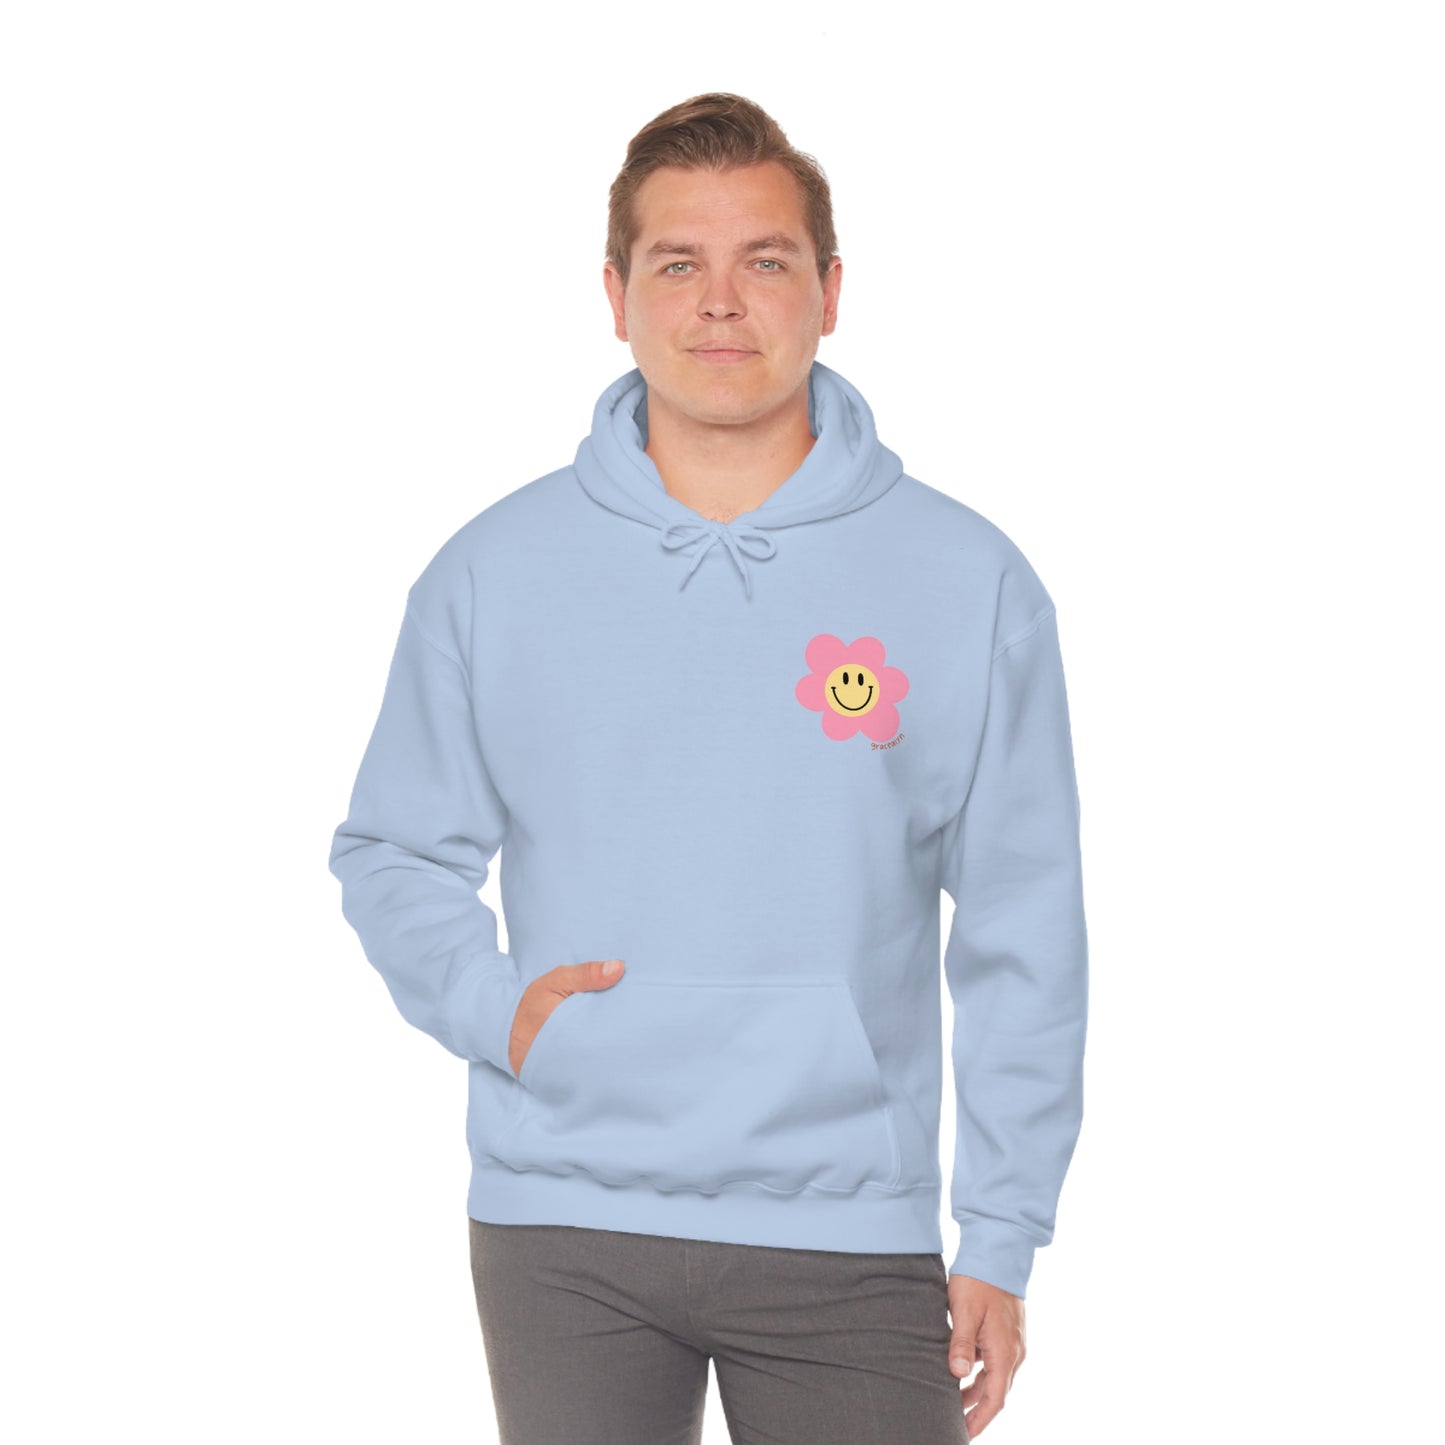 It's Cool To Be Kind Hooded Sweatshirt